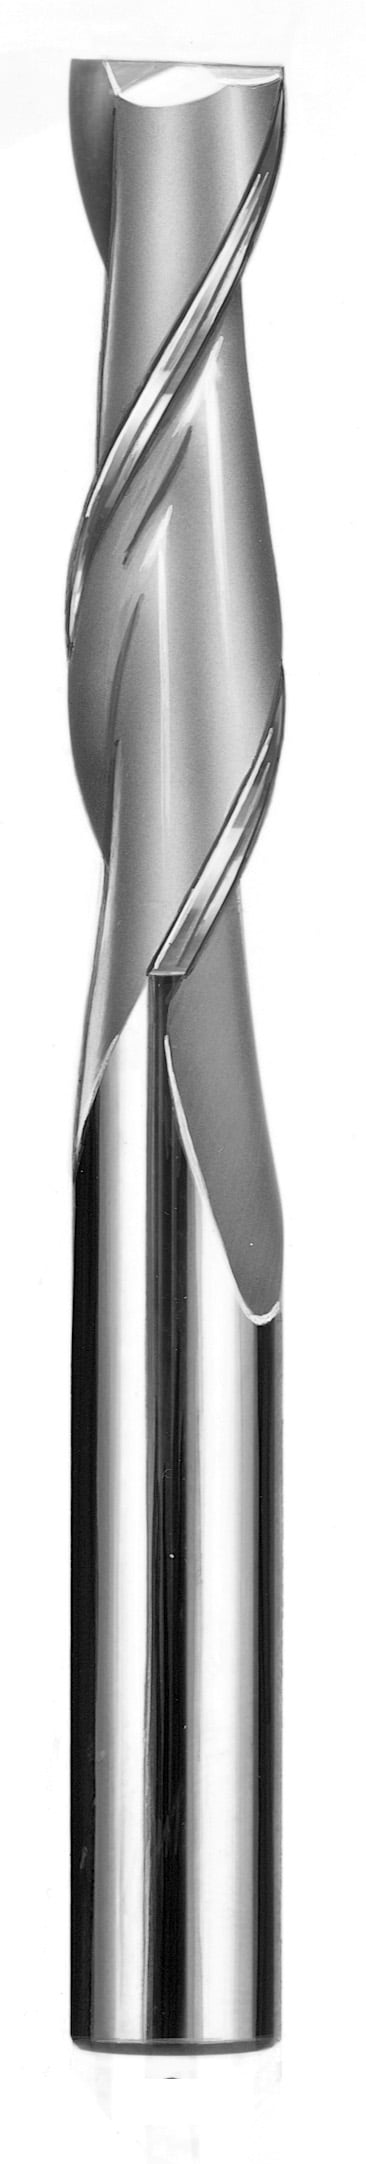 1/4" Dia, 2 Flute, Square End End Mill - 33303